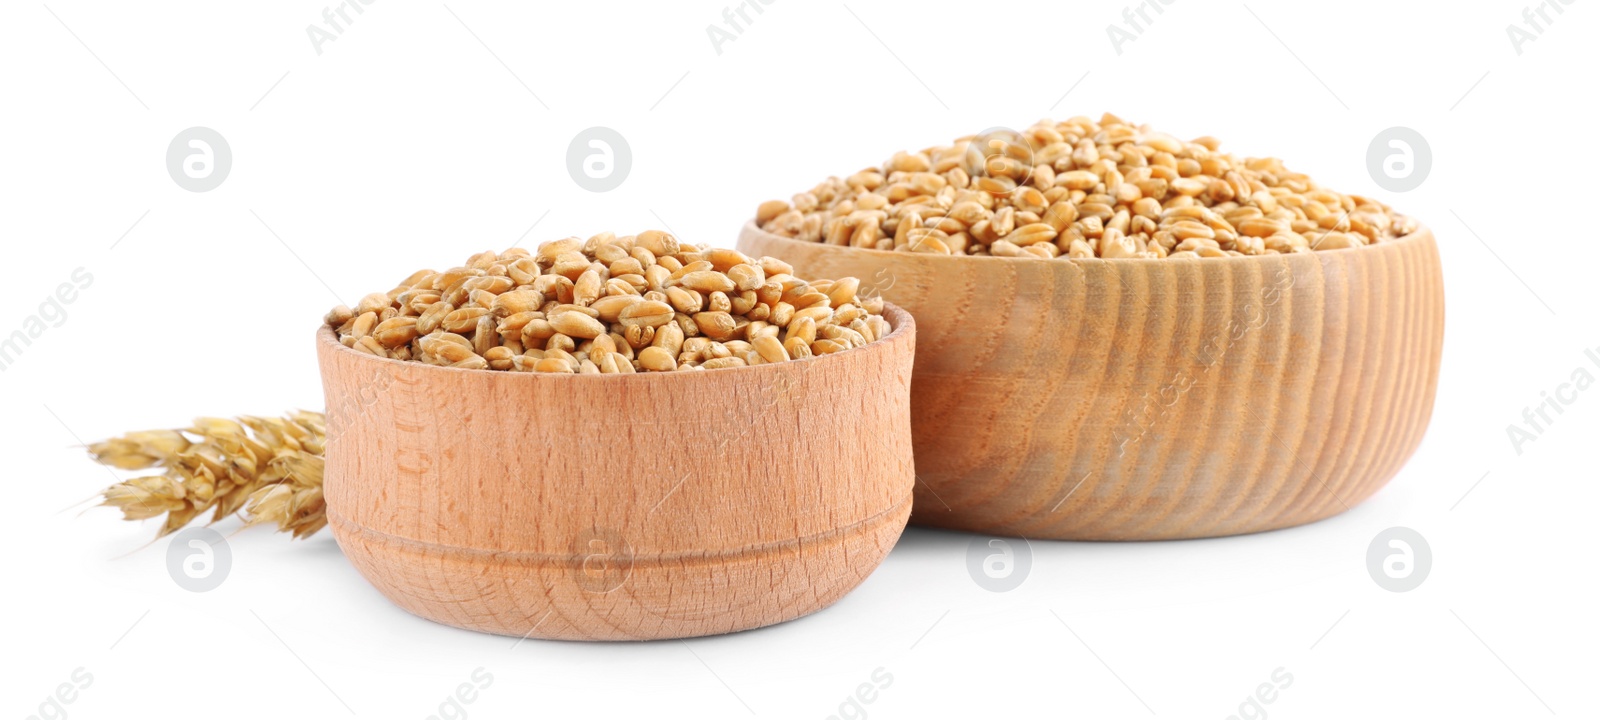 Photo of Wooden bowls with wheat grains and spikes on white background